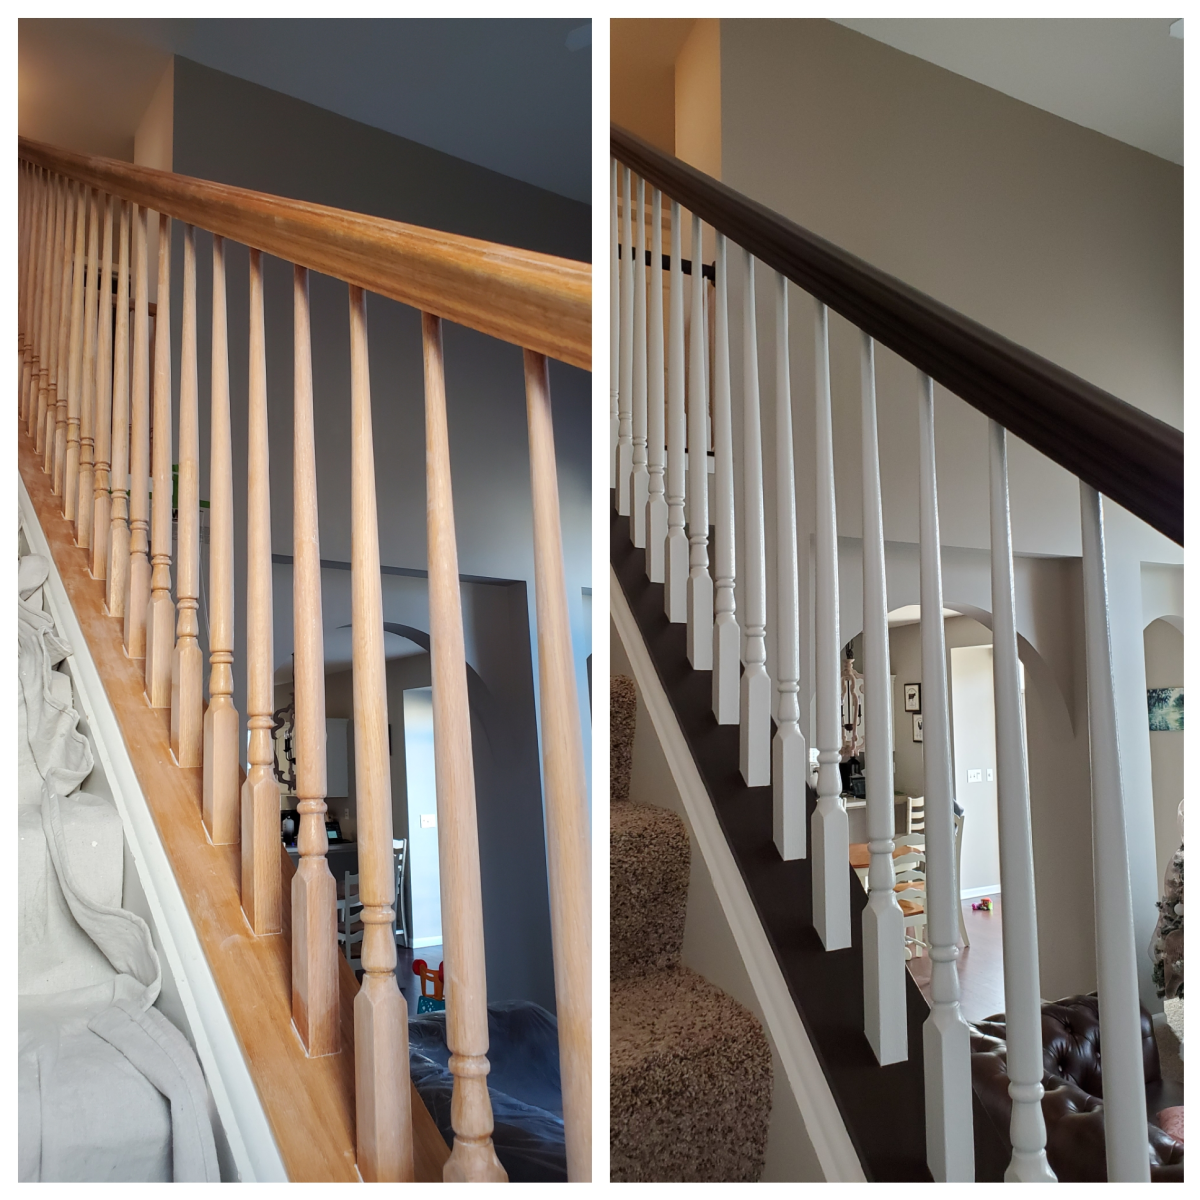 A handrail I painted dark brown with Pure White for the spindles. 